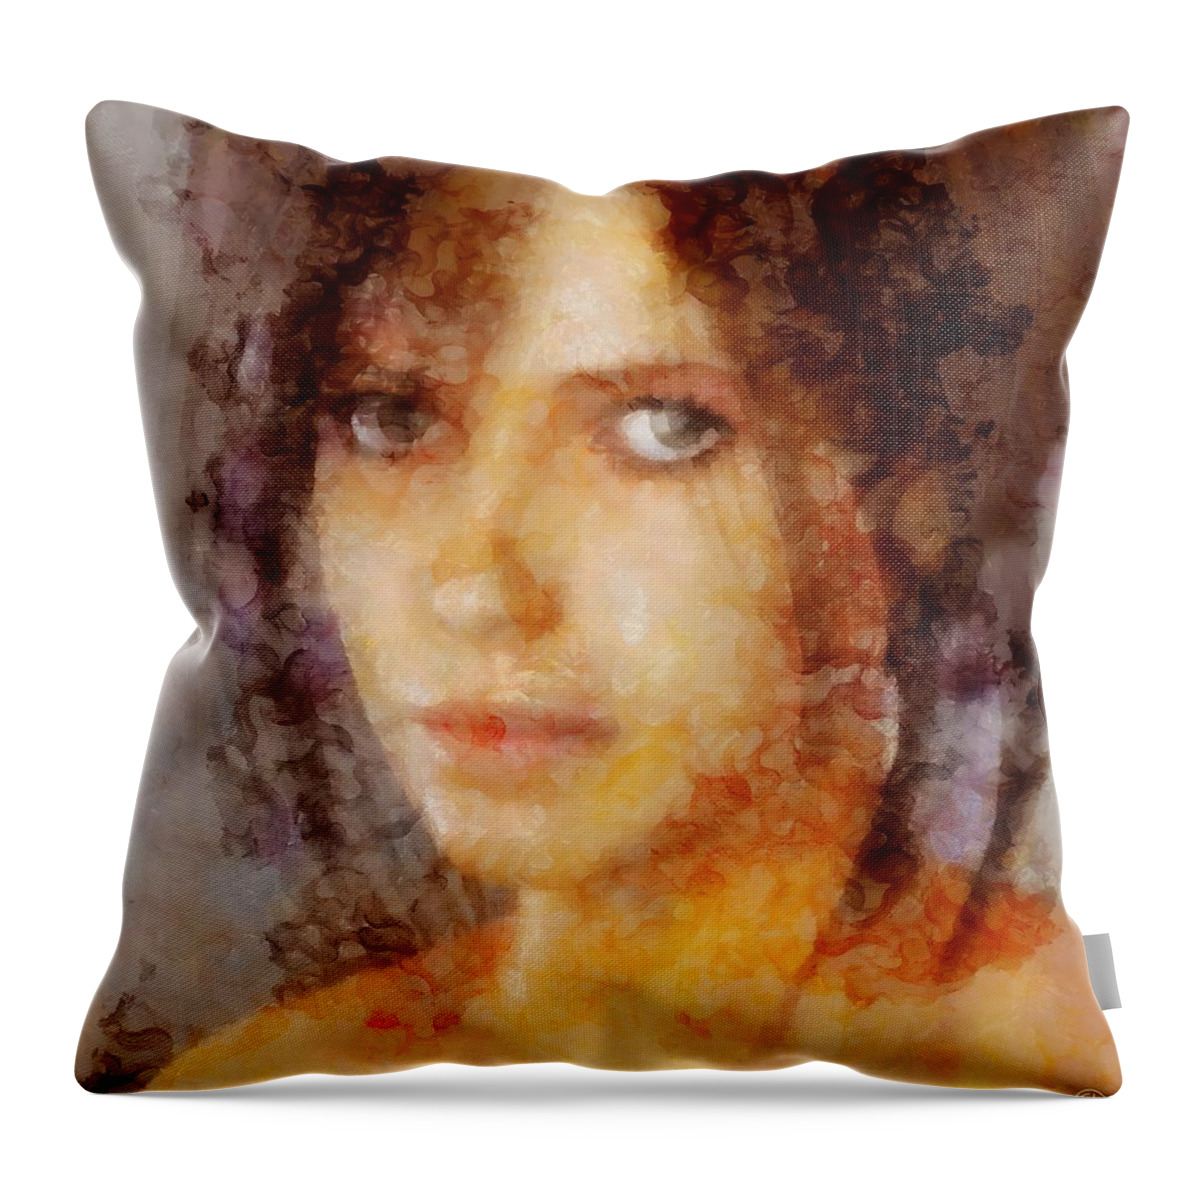 Woman Throw Pillow featuring the photograph I met her in a dream by Gun Legler